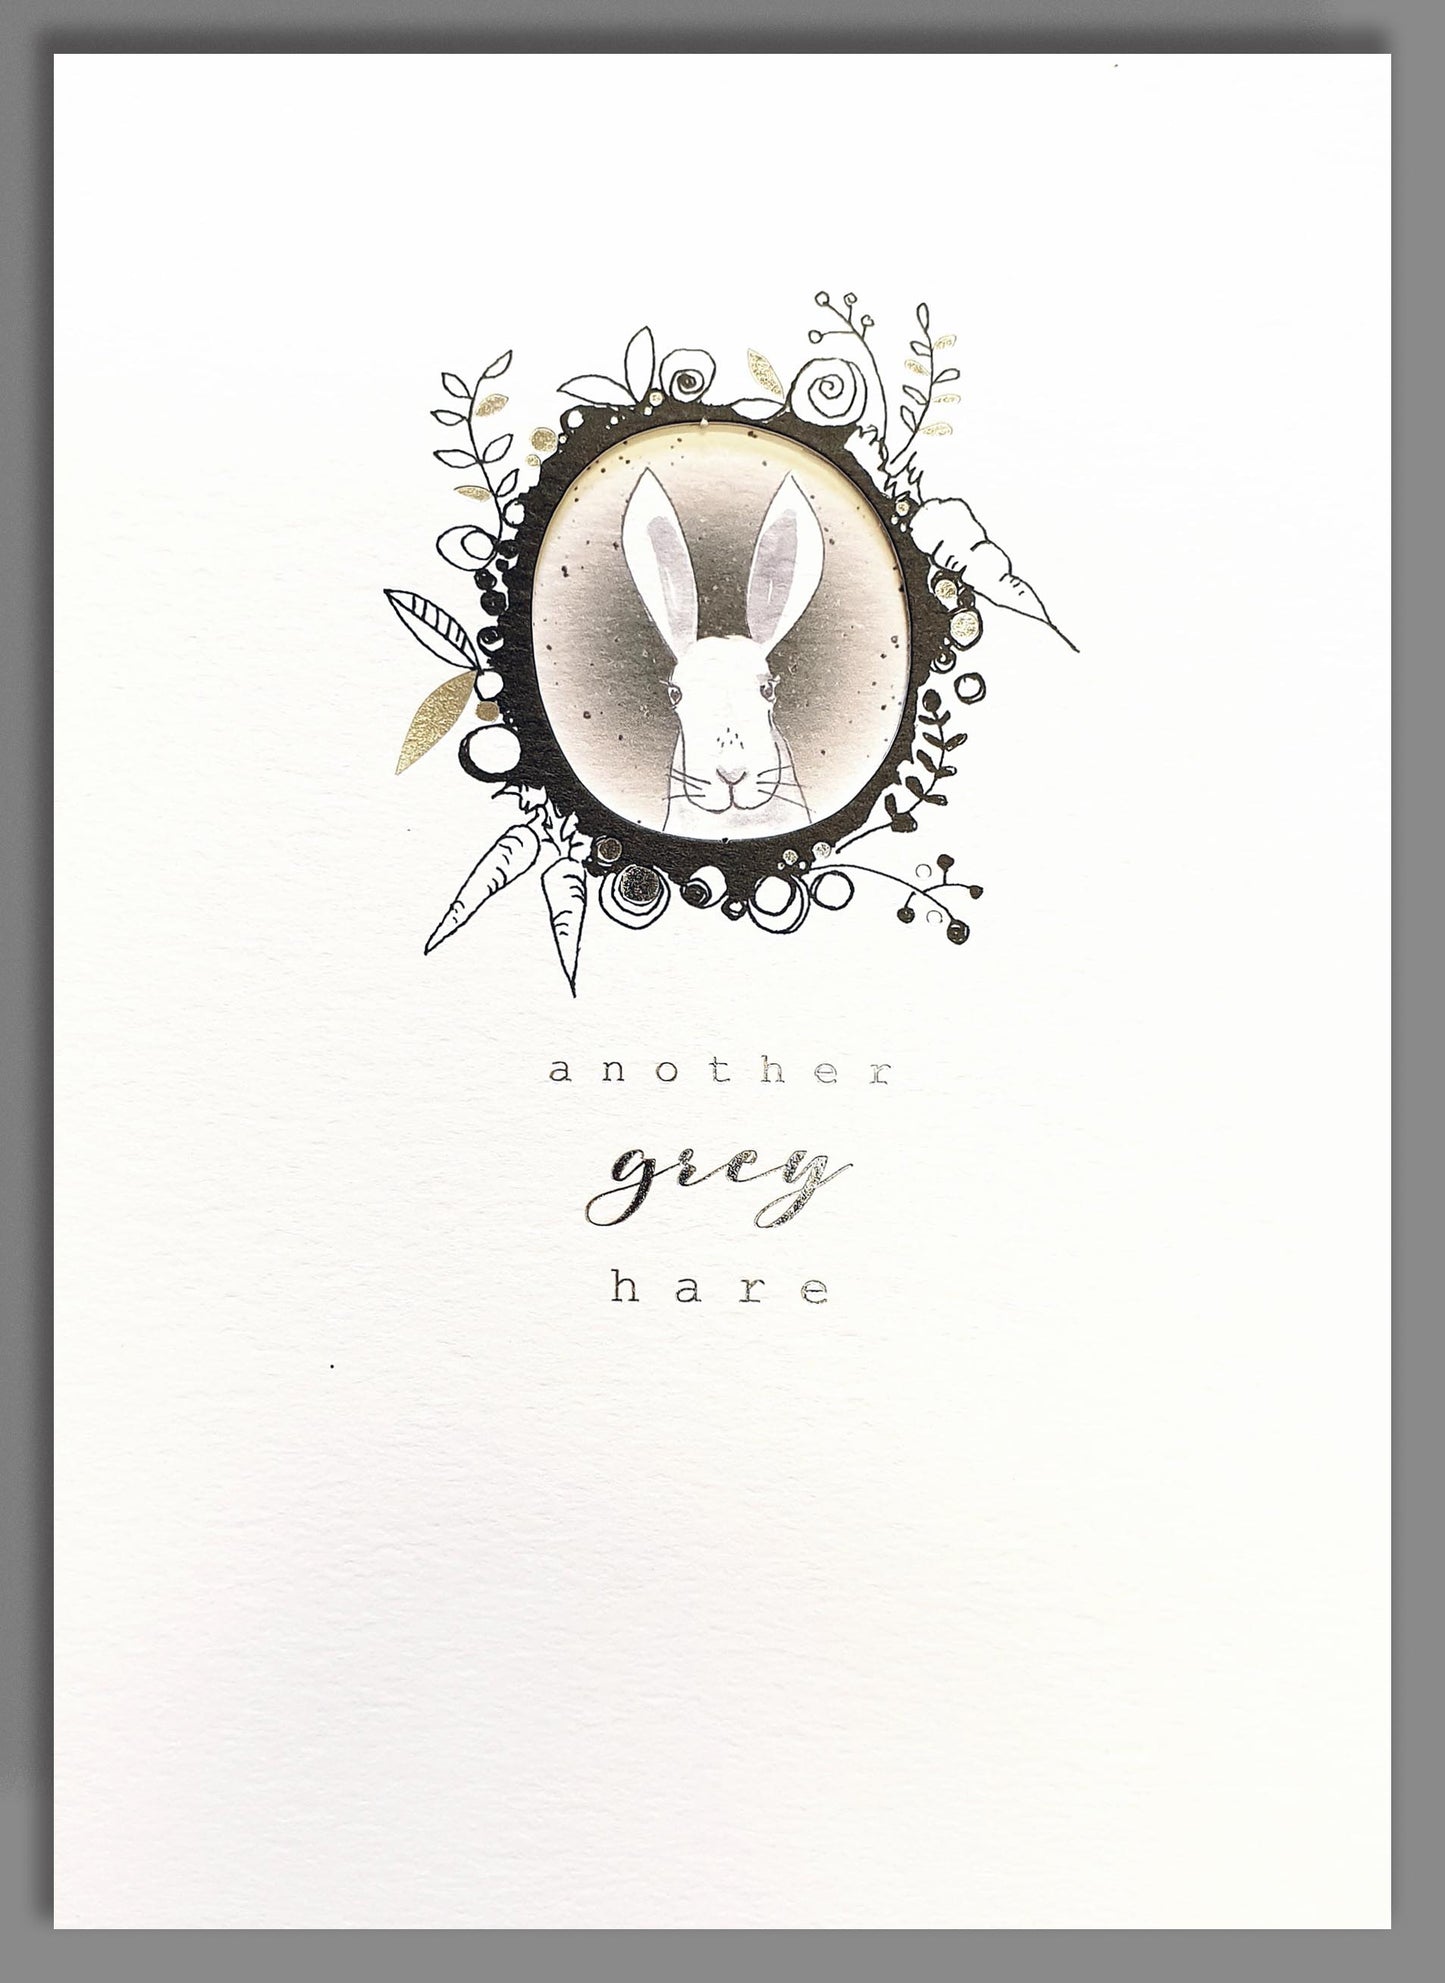 Another Grey Hare Birthday Card